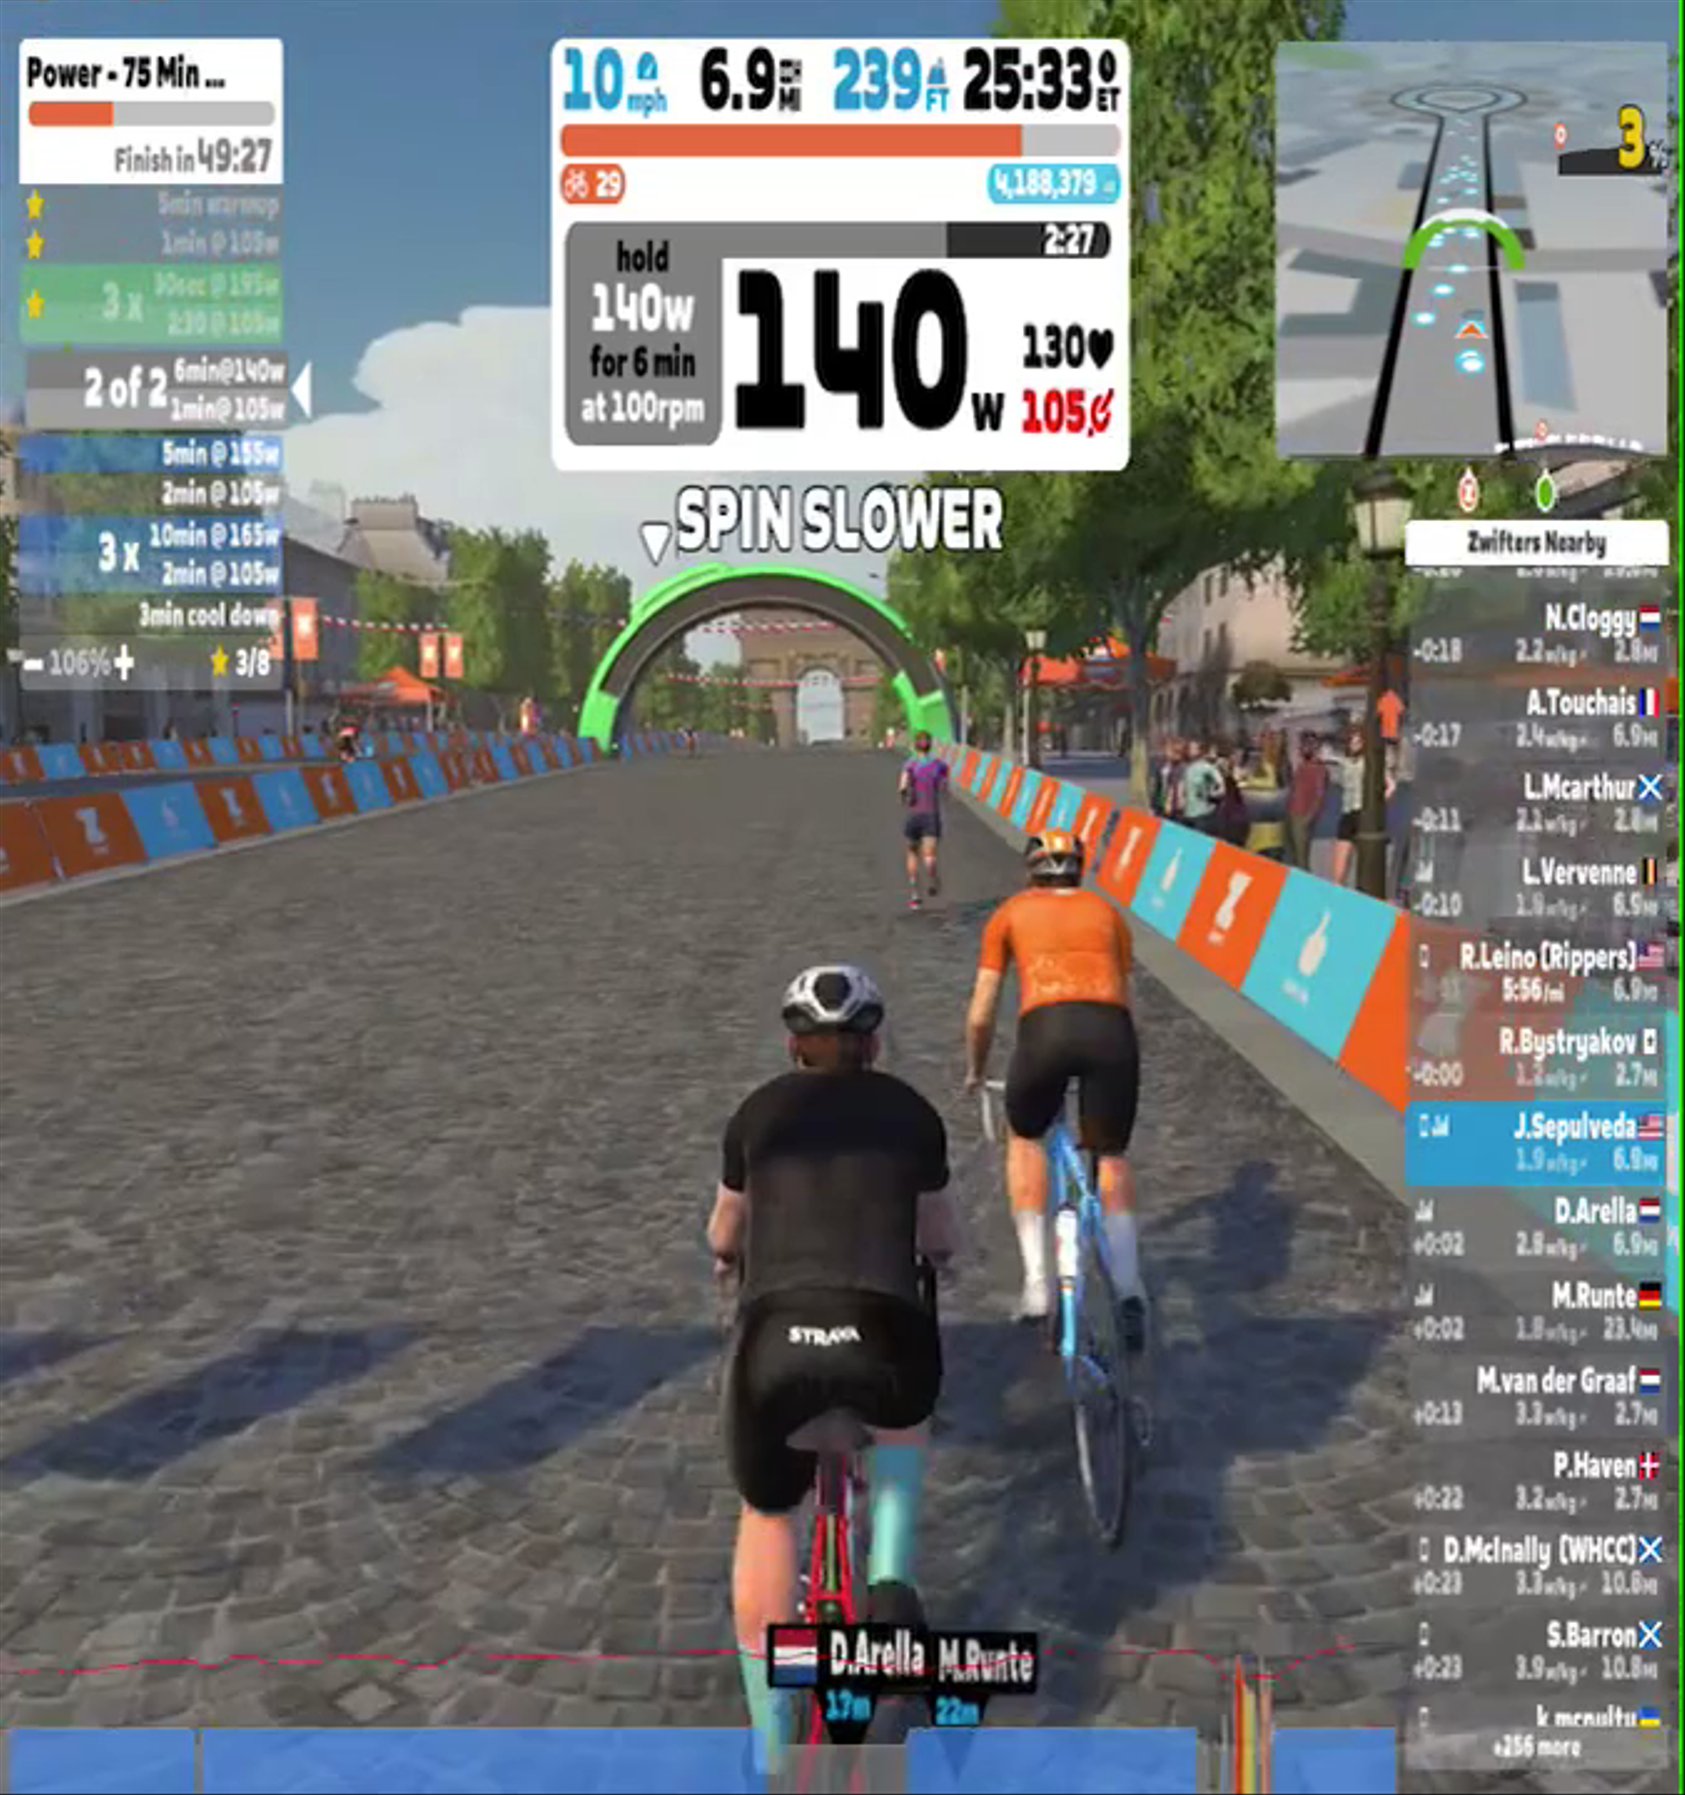 Zwift - Power - 75 Min Endurance Spin Out V2 in Paris